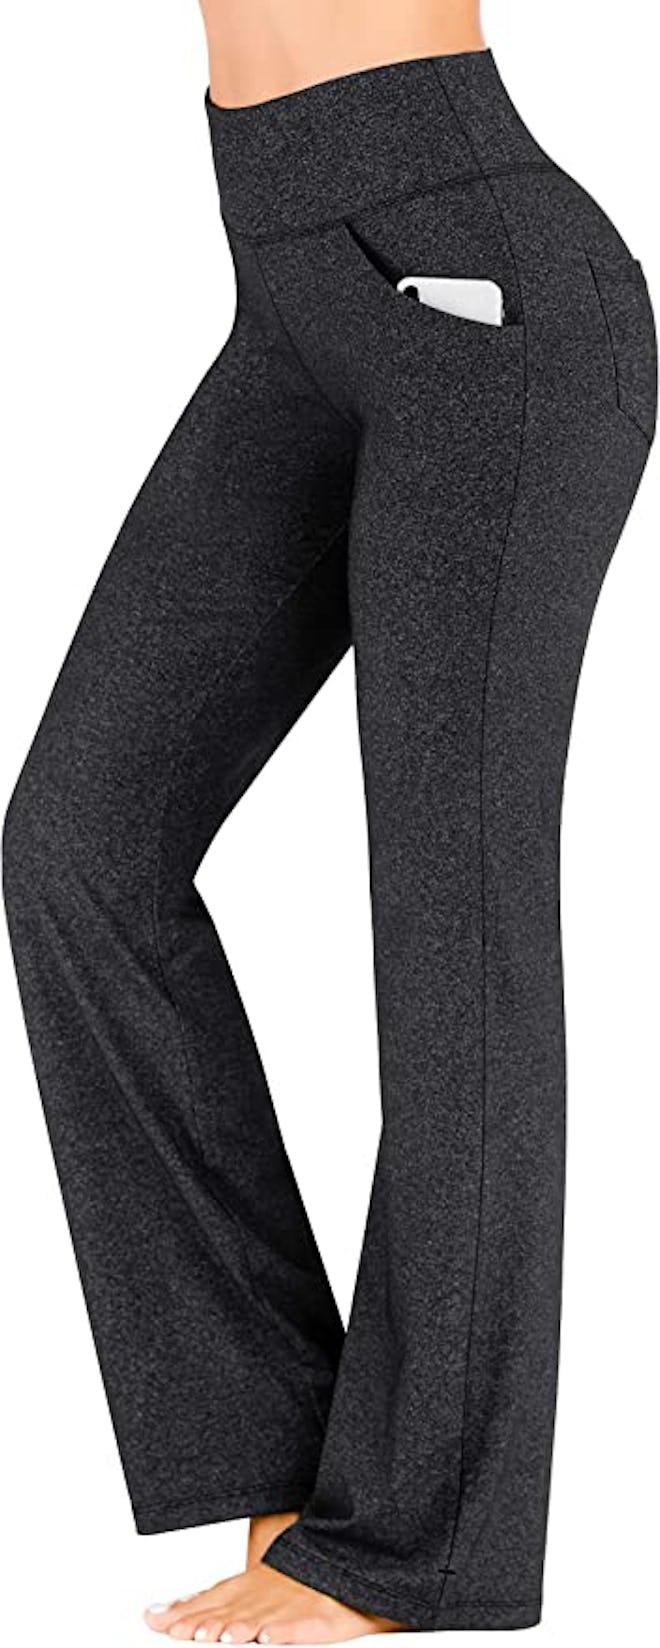 These work pants that feel like yoga pants are more casual but have a bootcut fit and back pockets.